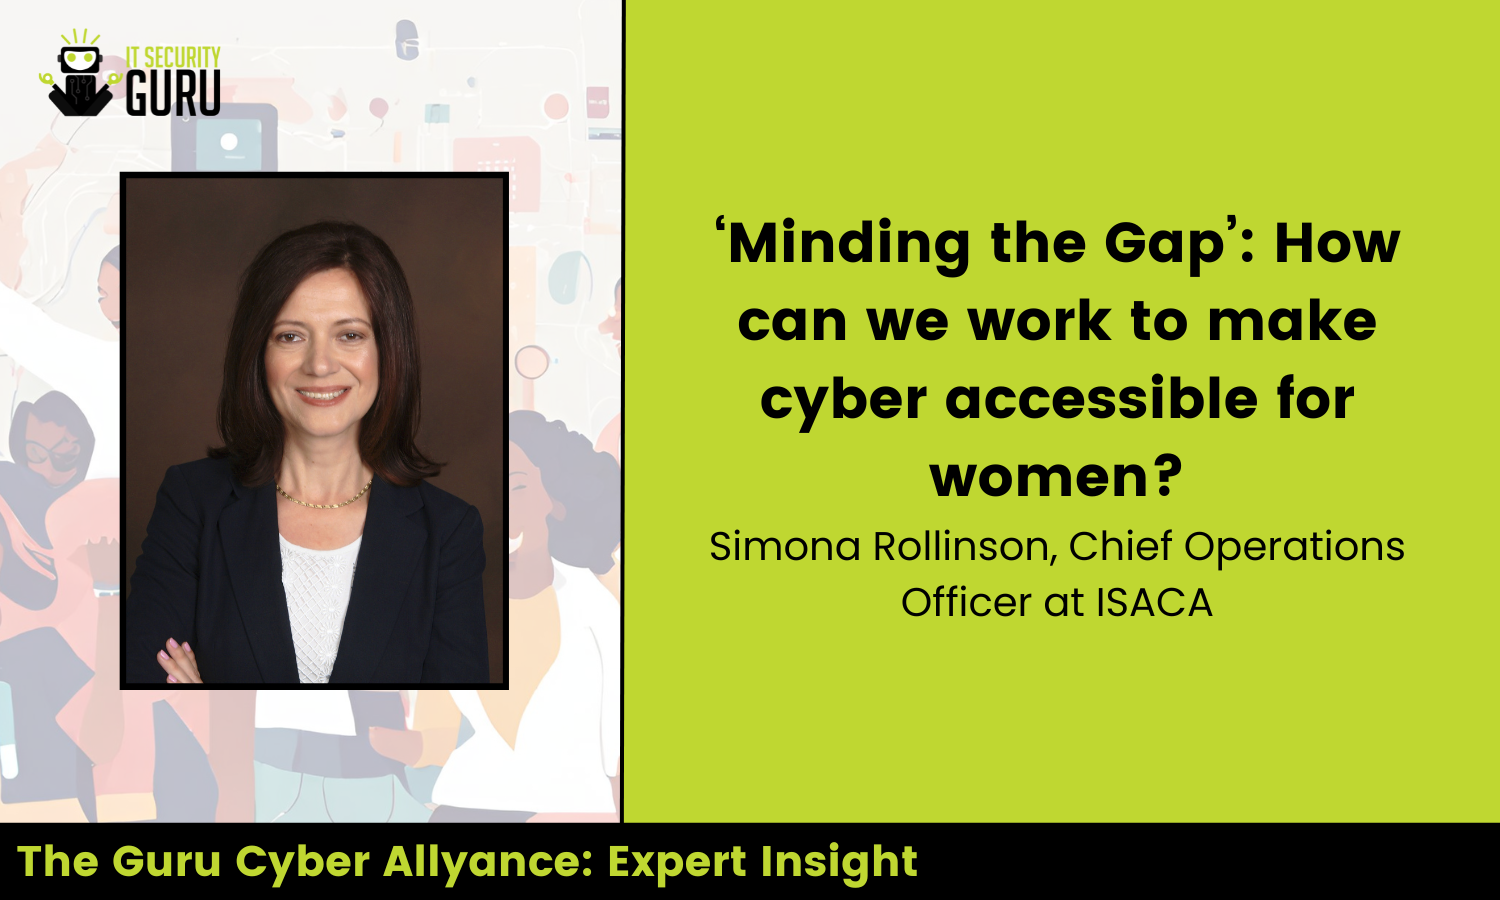 Expert Insight: ‘Minding the Gap’: How can we work to make cyber accessible for women?